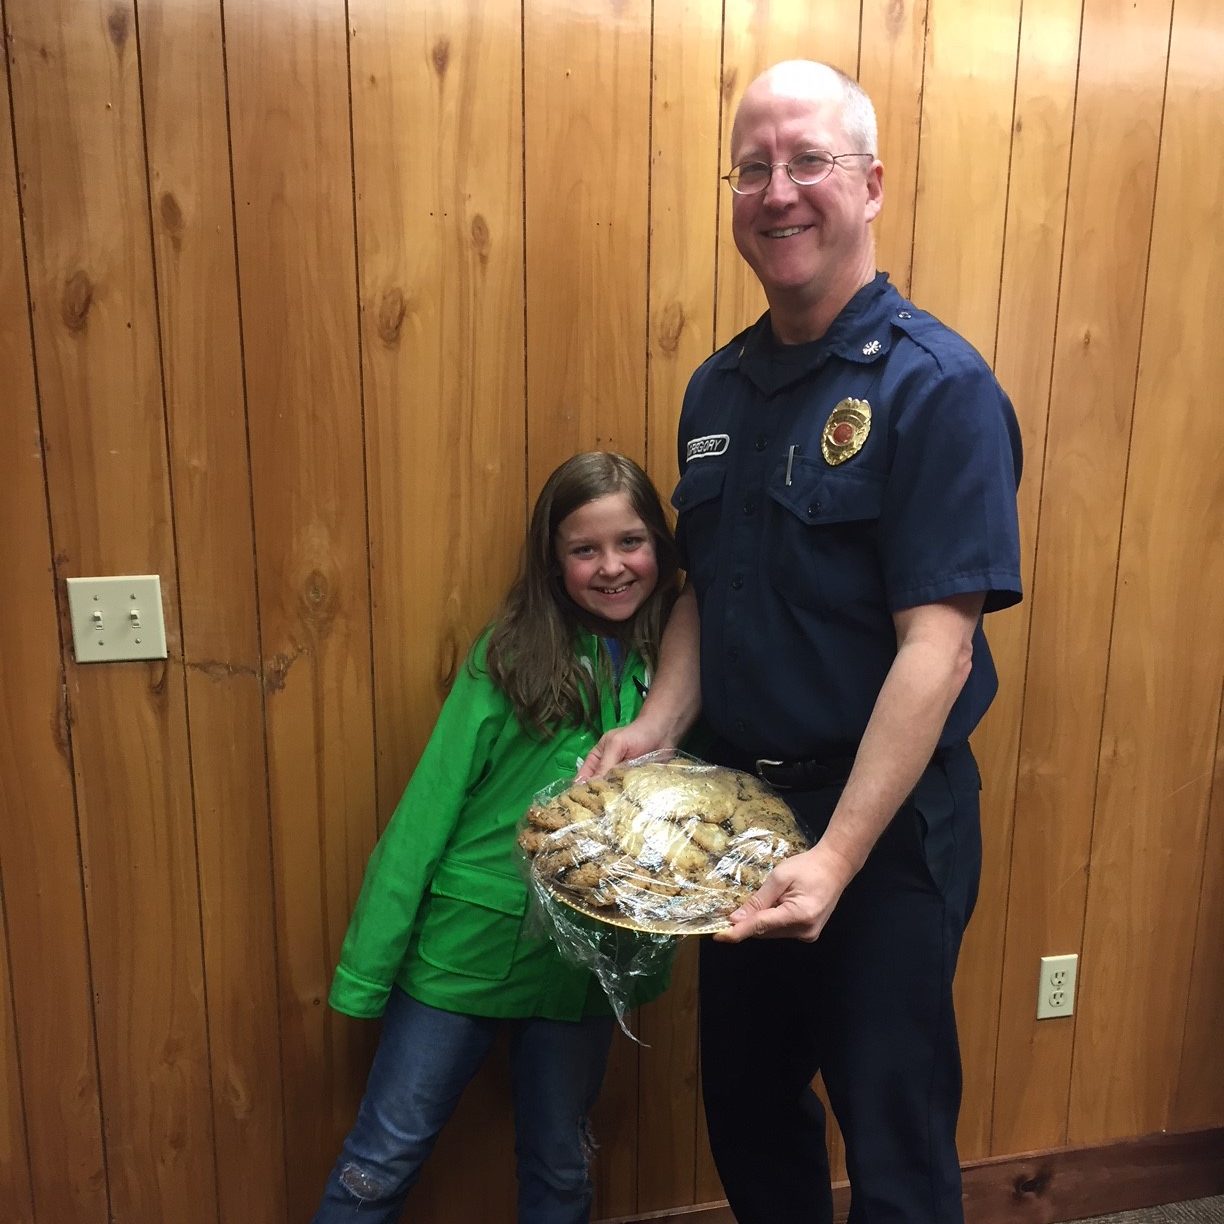 a young student hugs a firefighter who is holding a plate of cookies